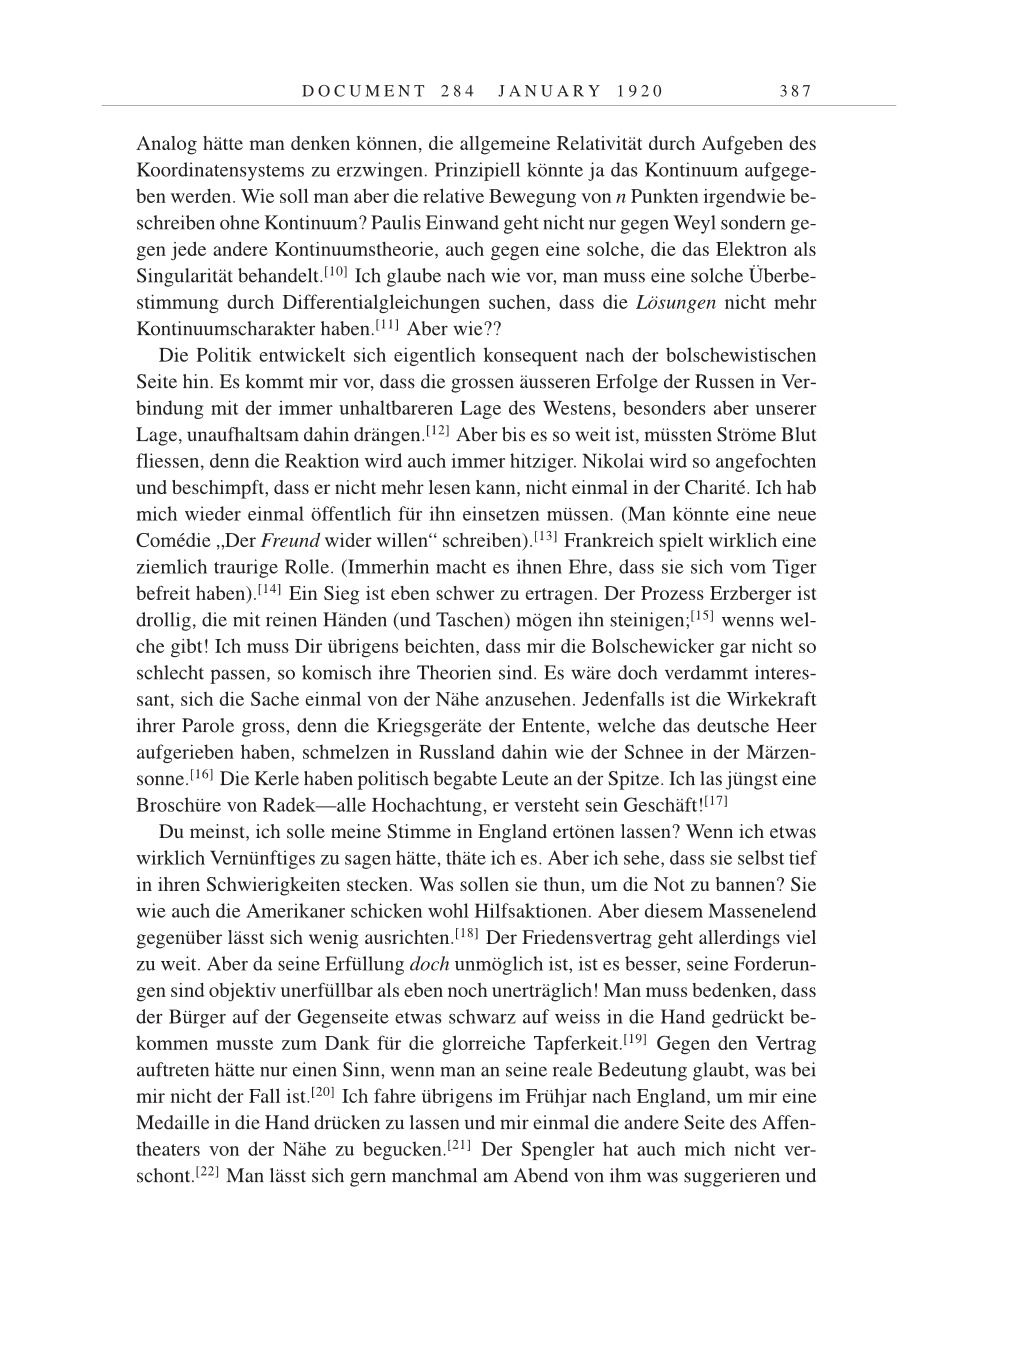 Volume 9: The Berlin Years: Correspondence January 1919-April 1920 page 387